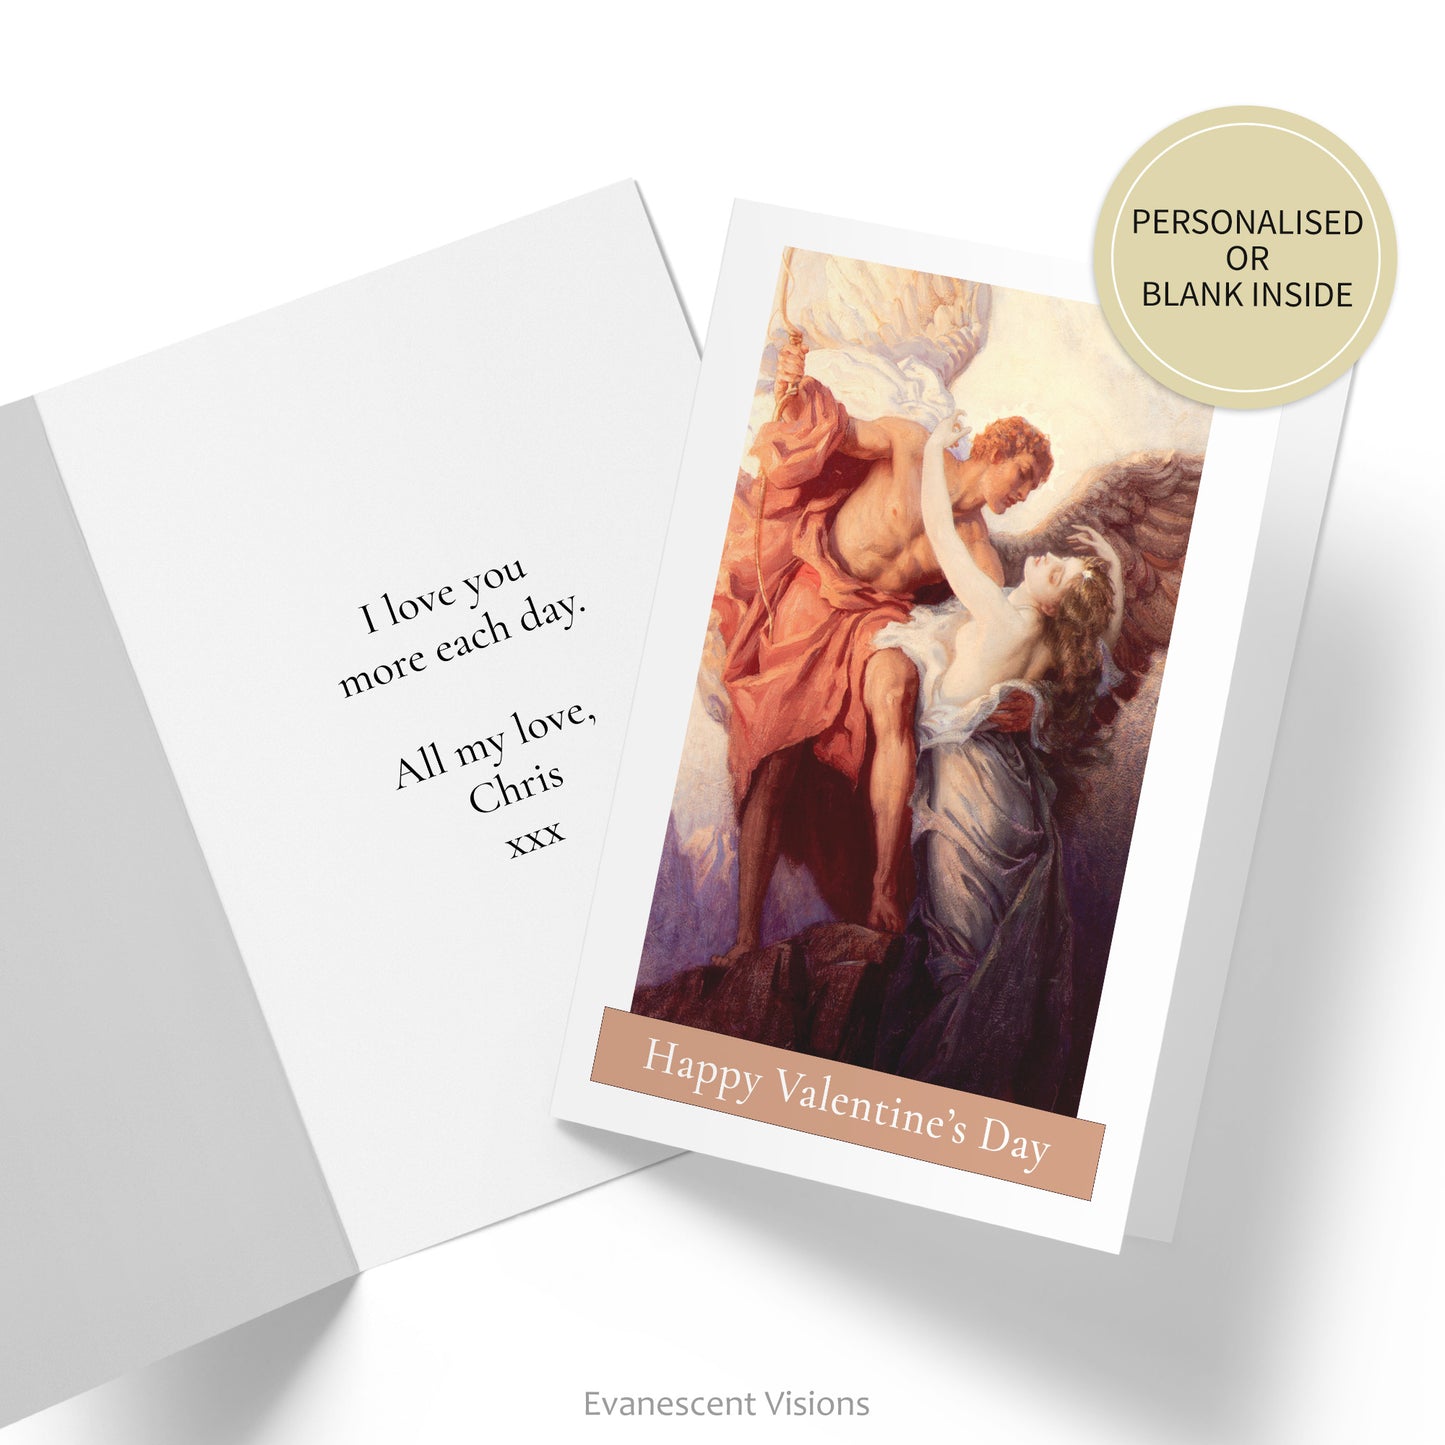 Card with the image 'Day and the Dawnstar' by Herbert James Draper. On the front of the card it says 'Happy Valentine's Day'.  Inside of card is shown with custom greeting. Sticker says personalised or blank inside.